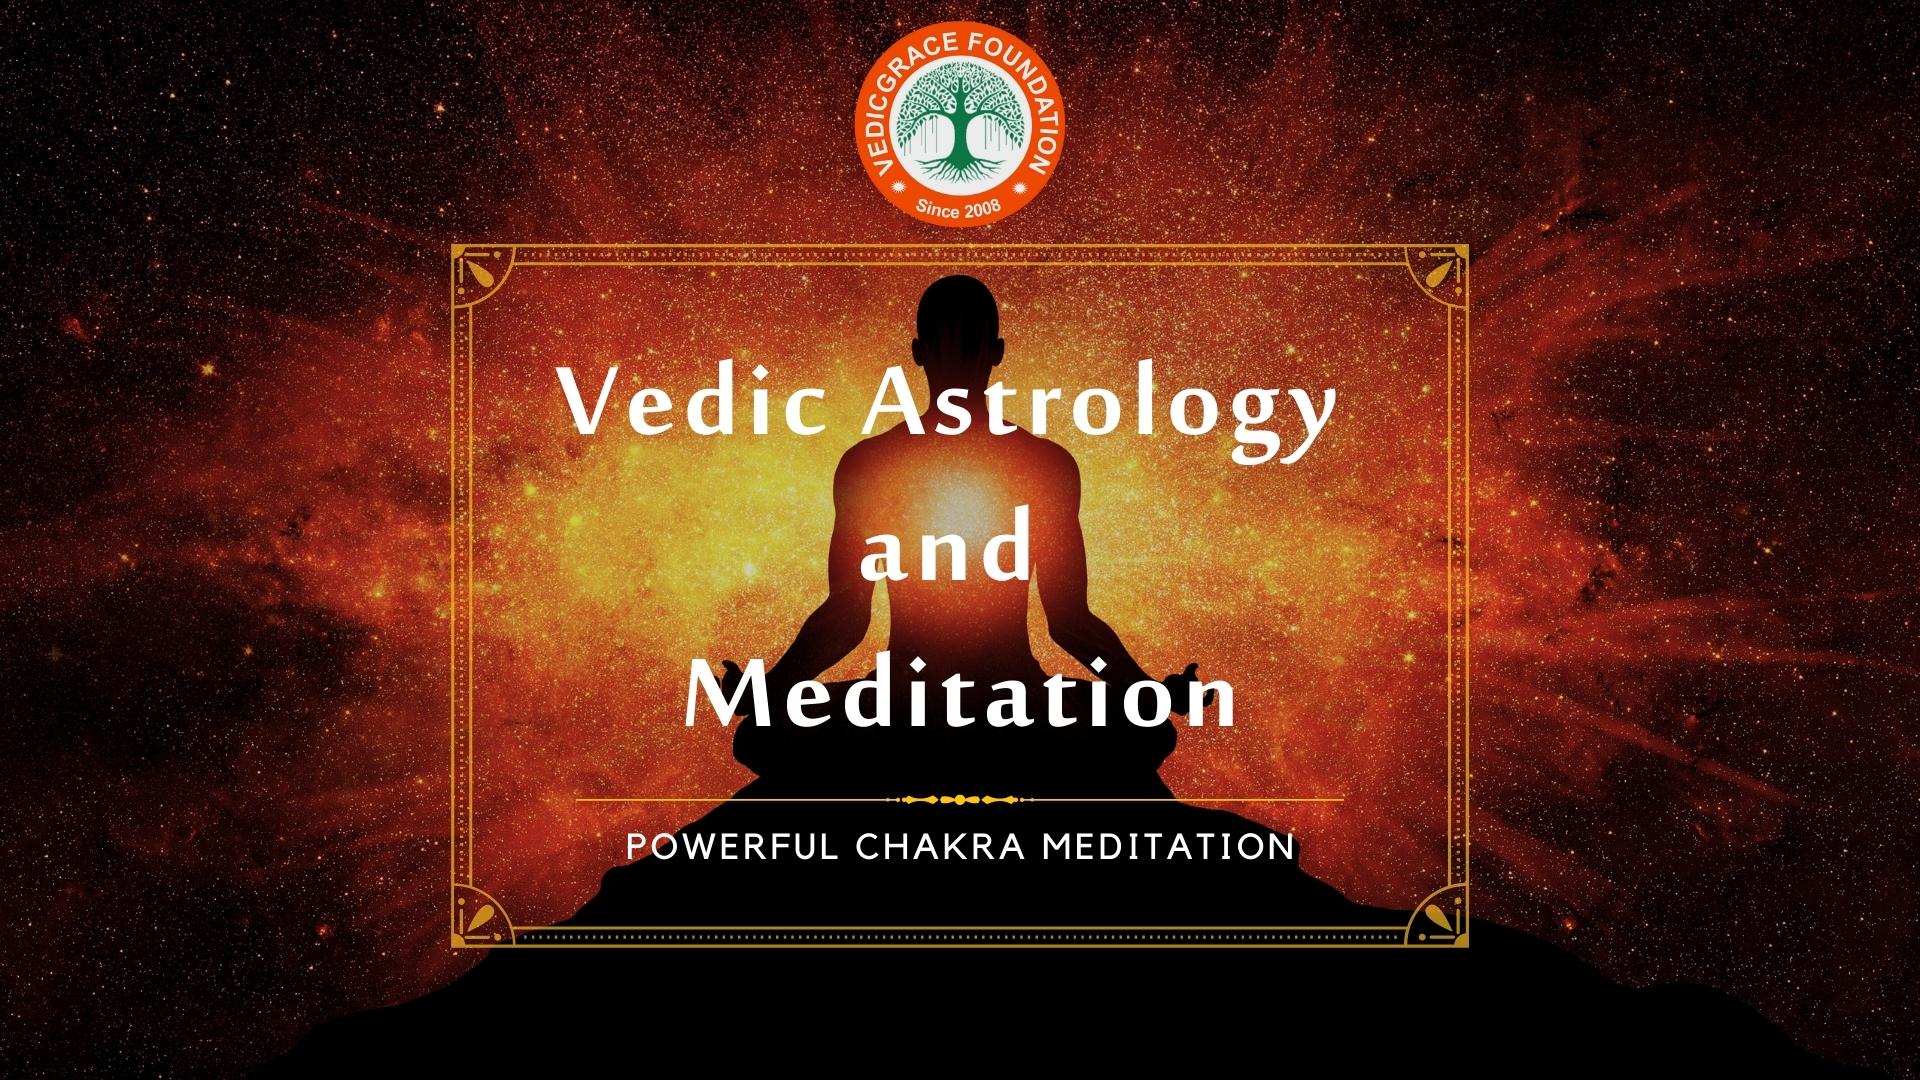 Vedic Astrology and Meditation